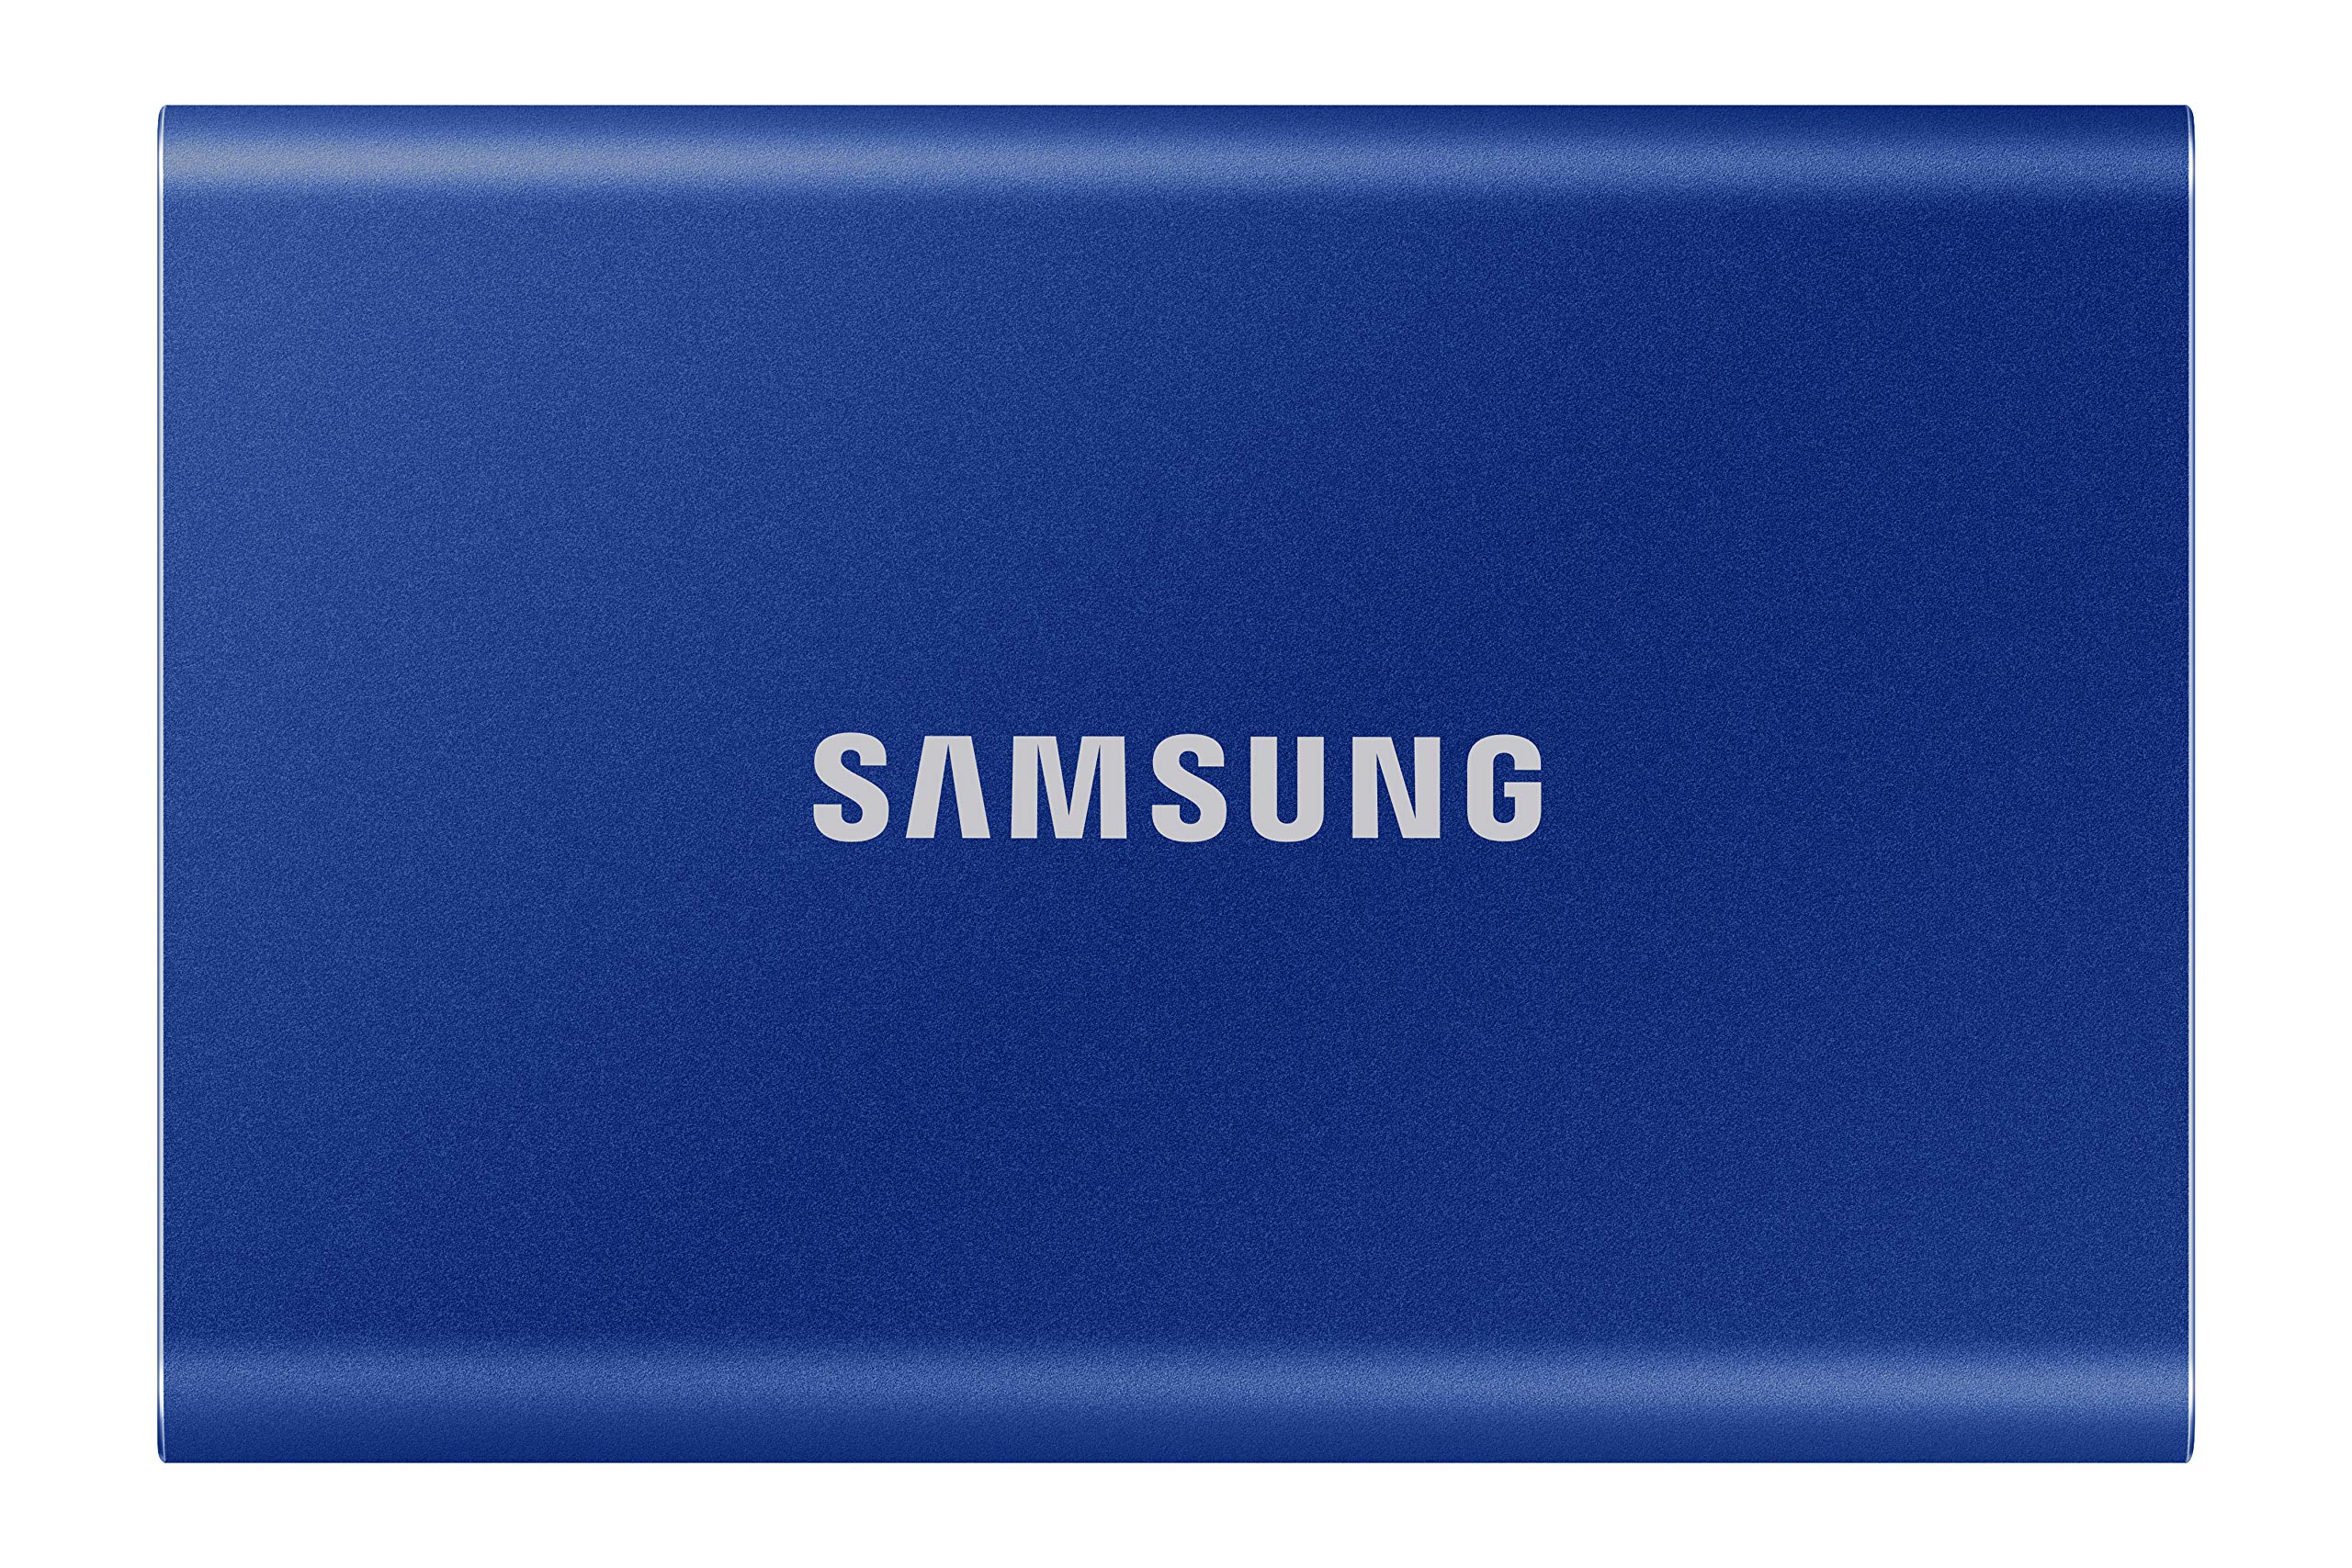 SAMSUNG T7 2TB, Portable SSD + 2mo Adobe CC Photography, up to 1050MB/s, USB 3.2 Gen2, Gaming, Students & Professionals, External Solid State Drive (MU-PC2T0H/AM), Blue